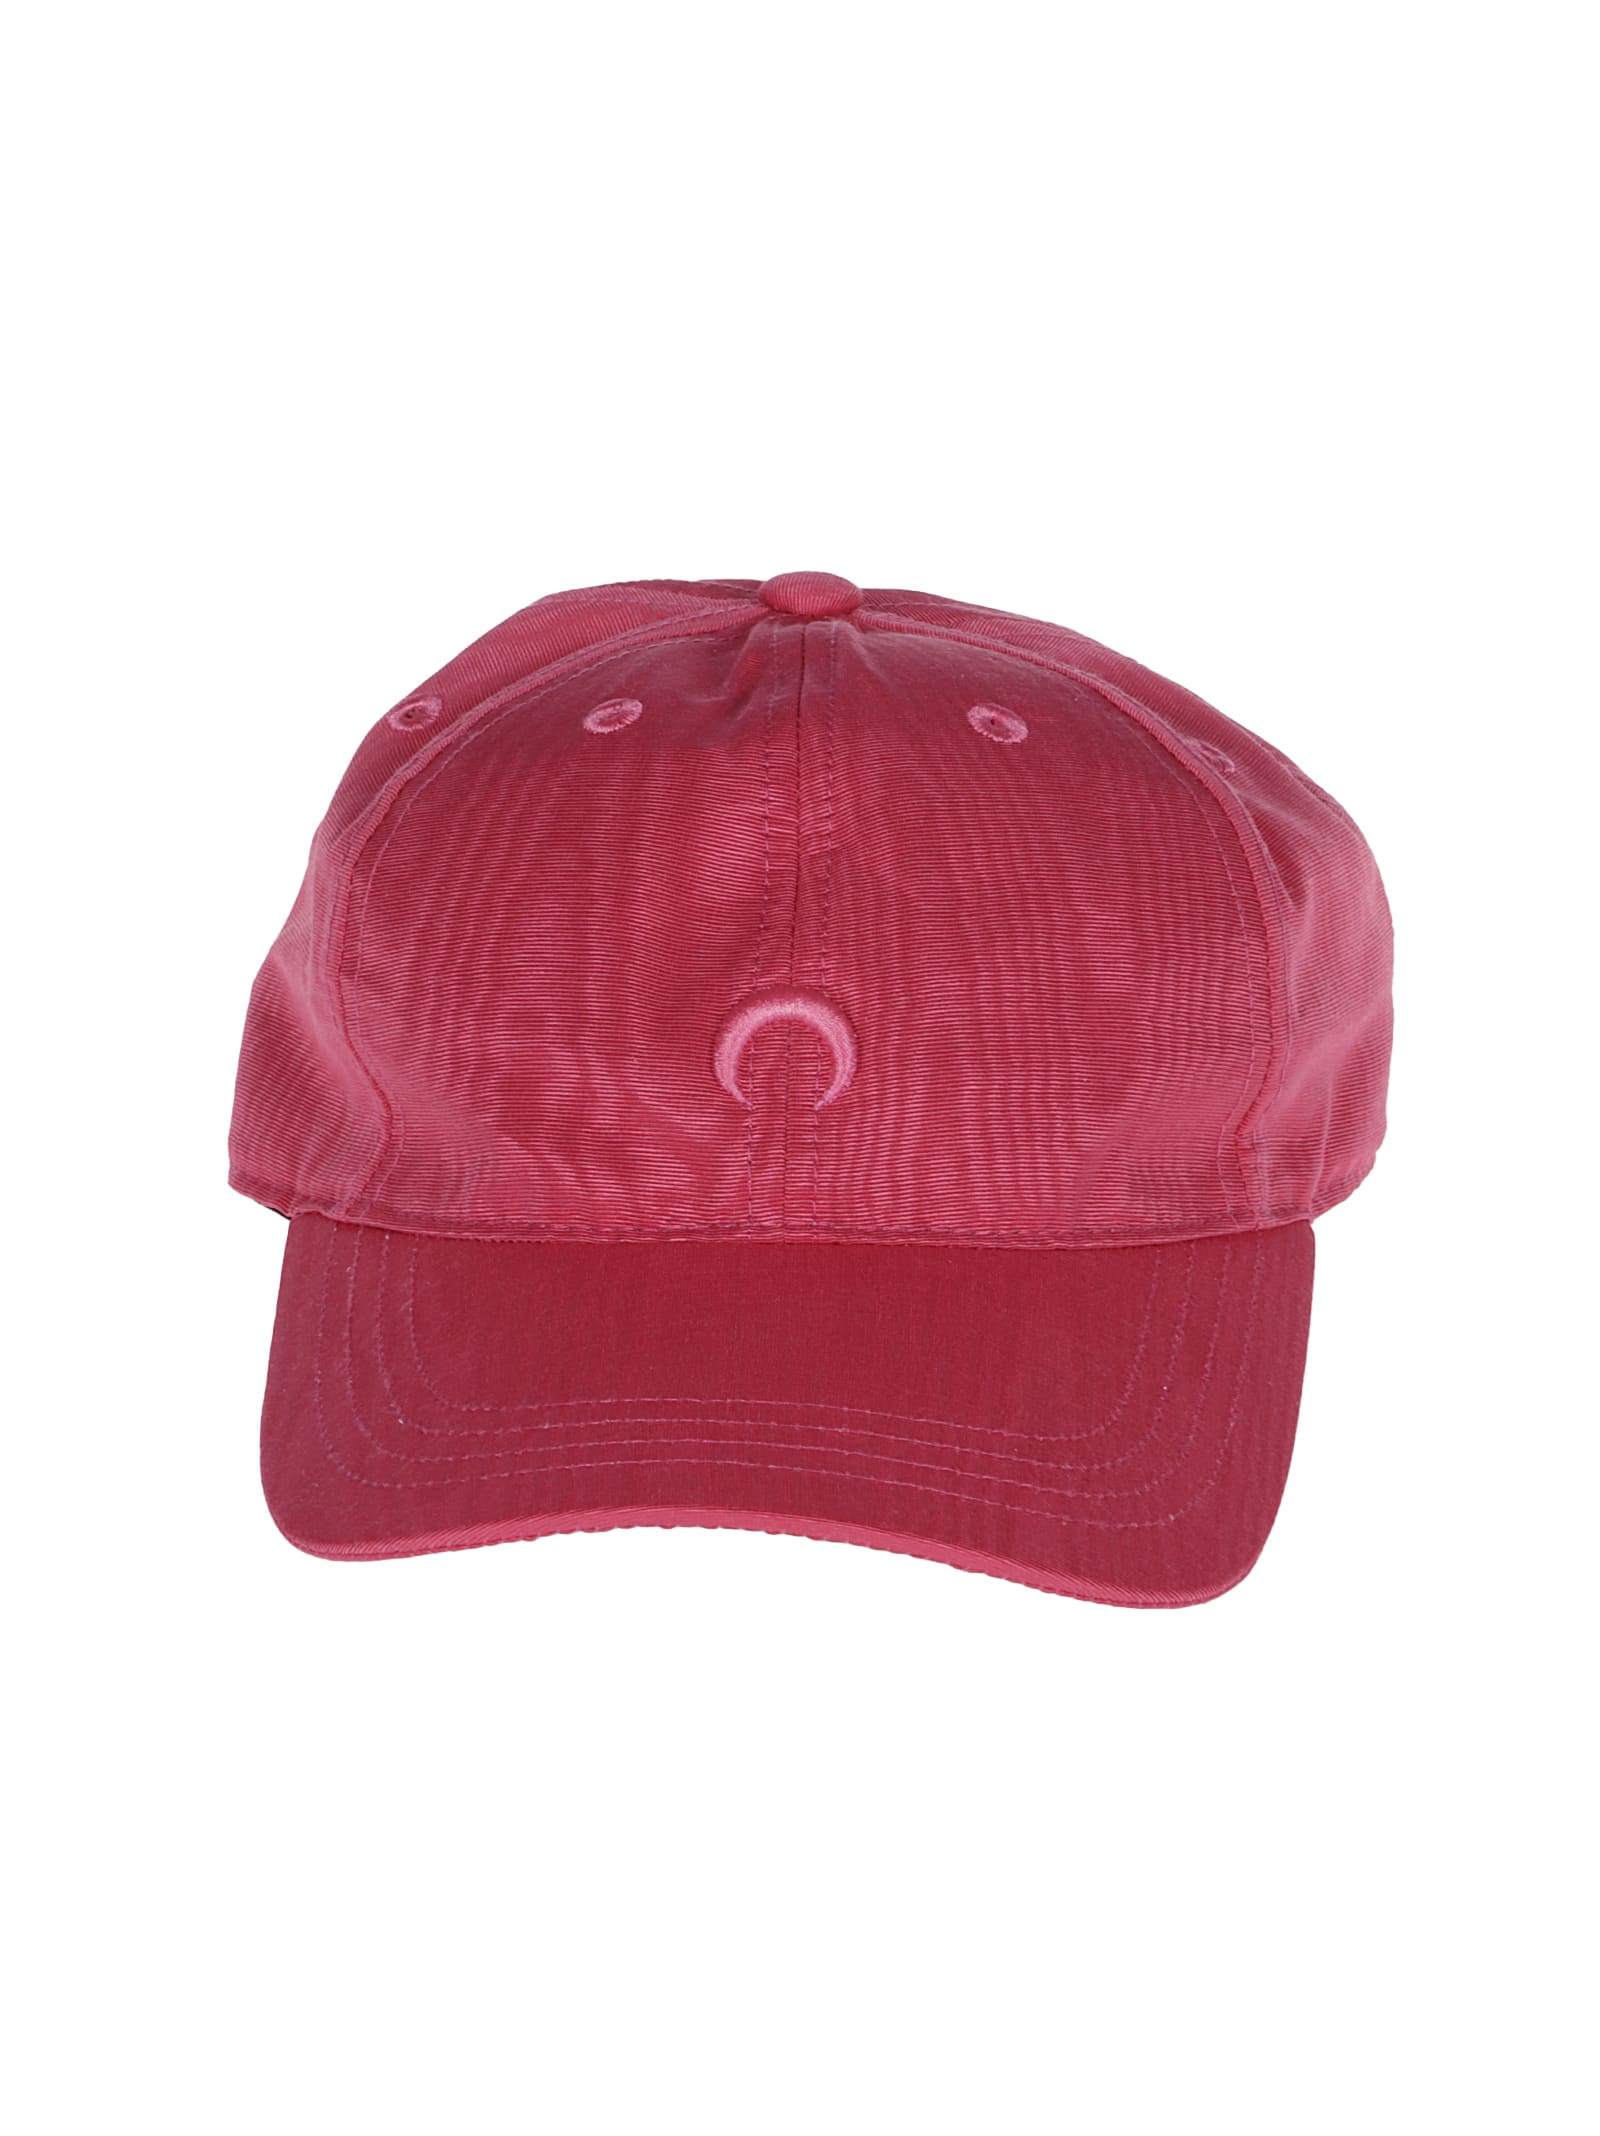 Marine Serre Embroidered Moire Cap Recycled